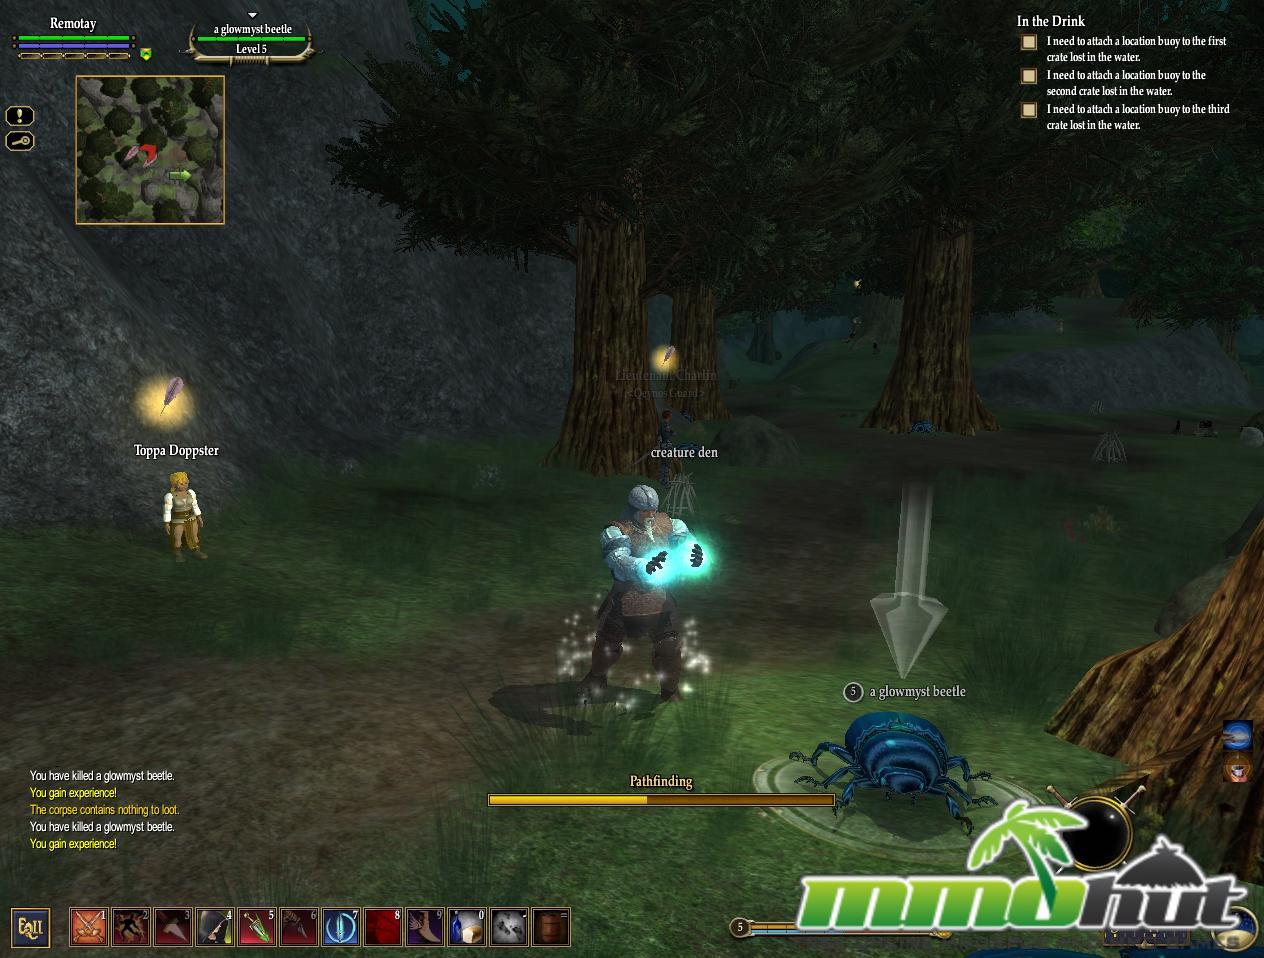 EverQuest II Review